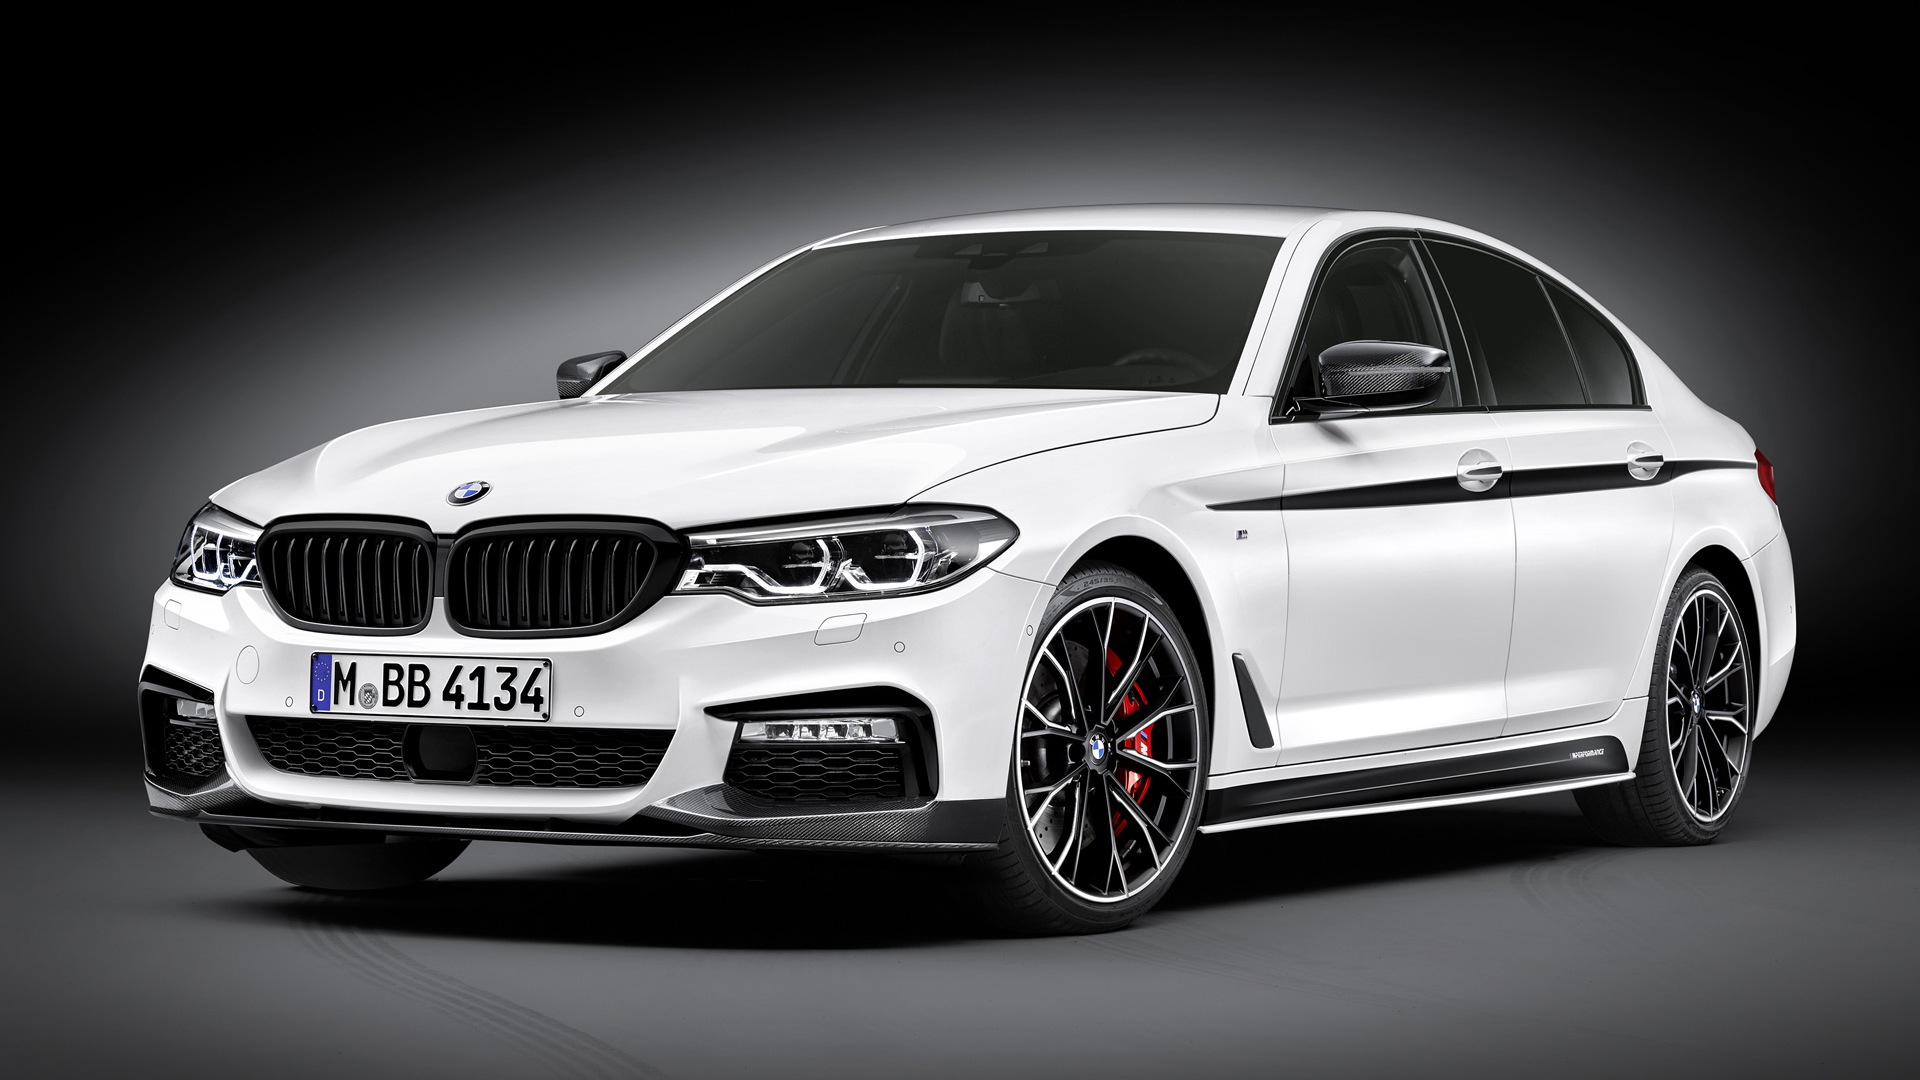 2017 BMW 5-Series equipped with M Performance parts